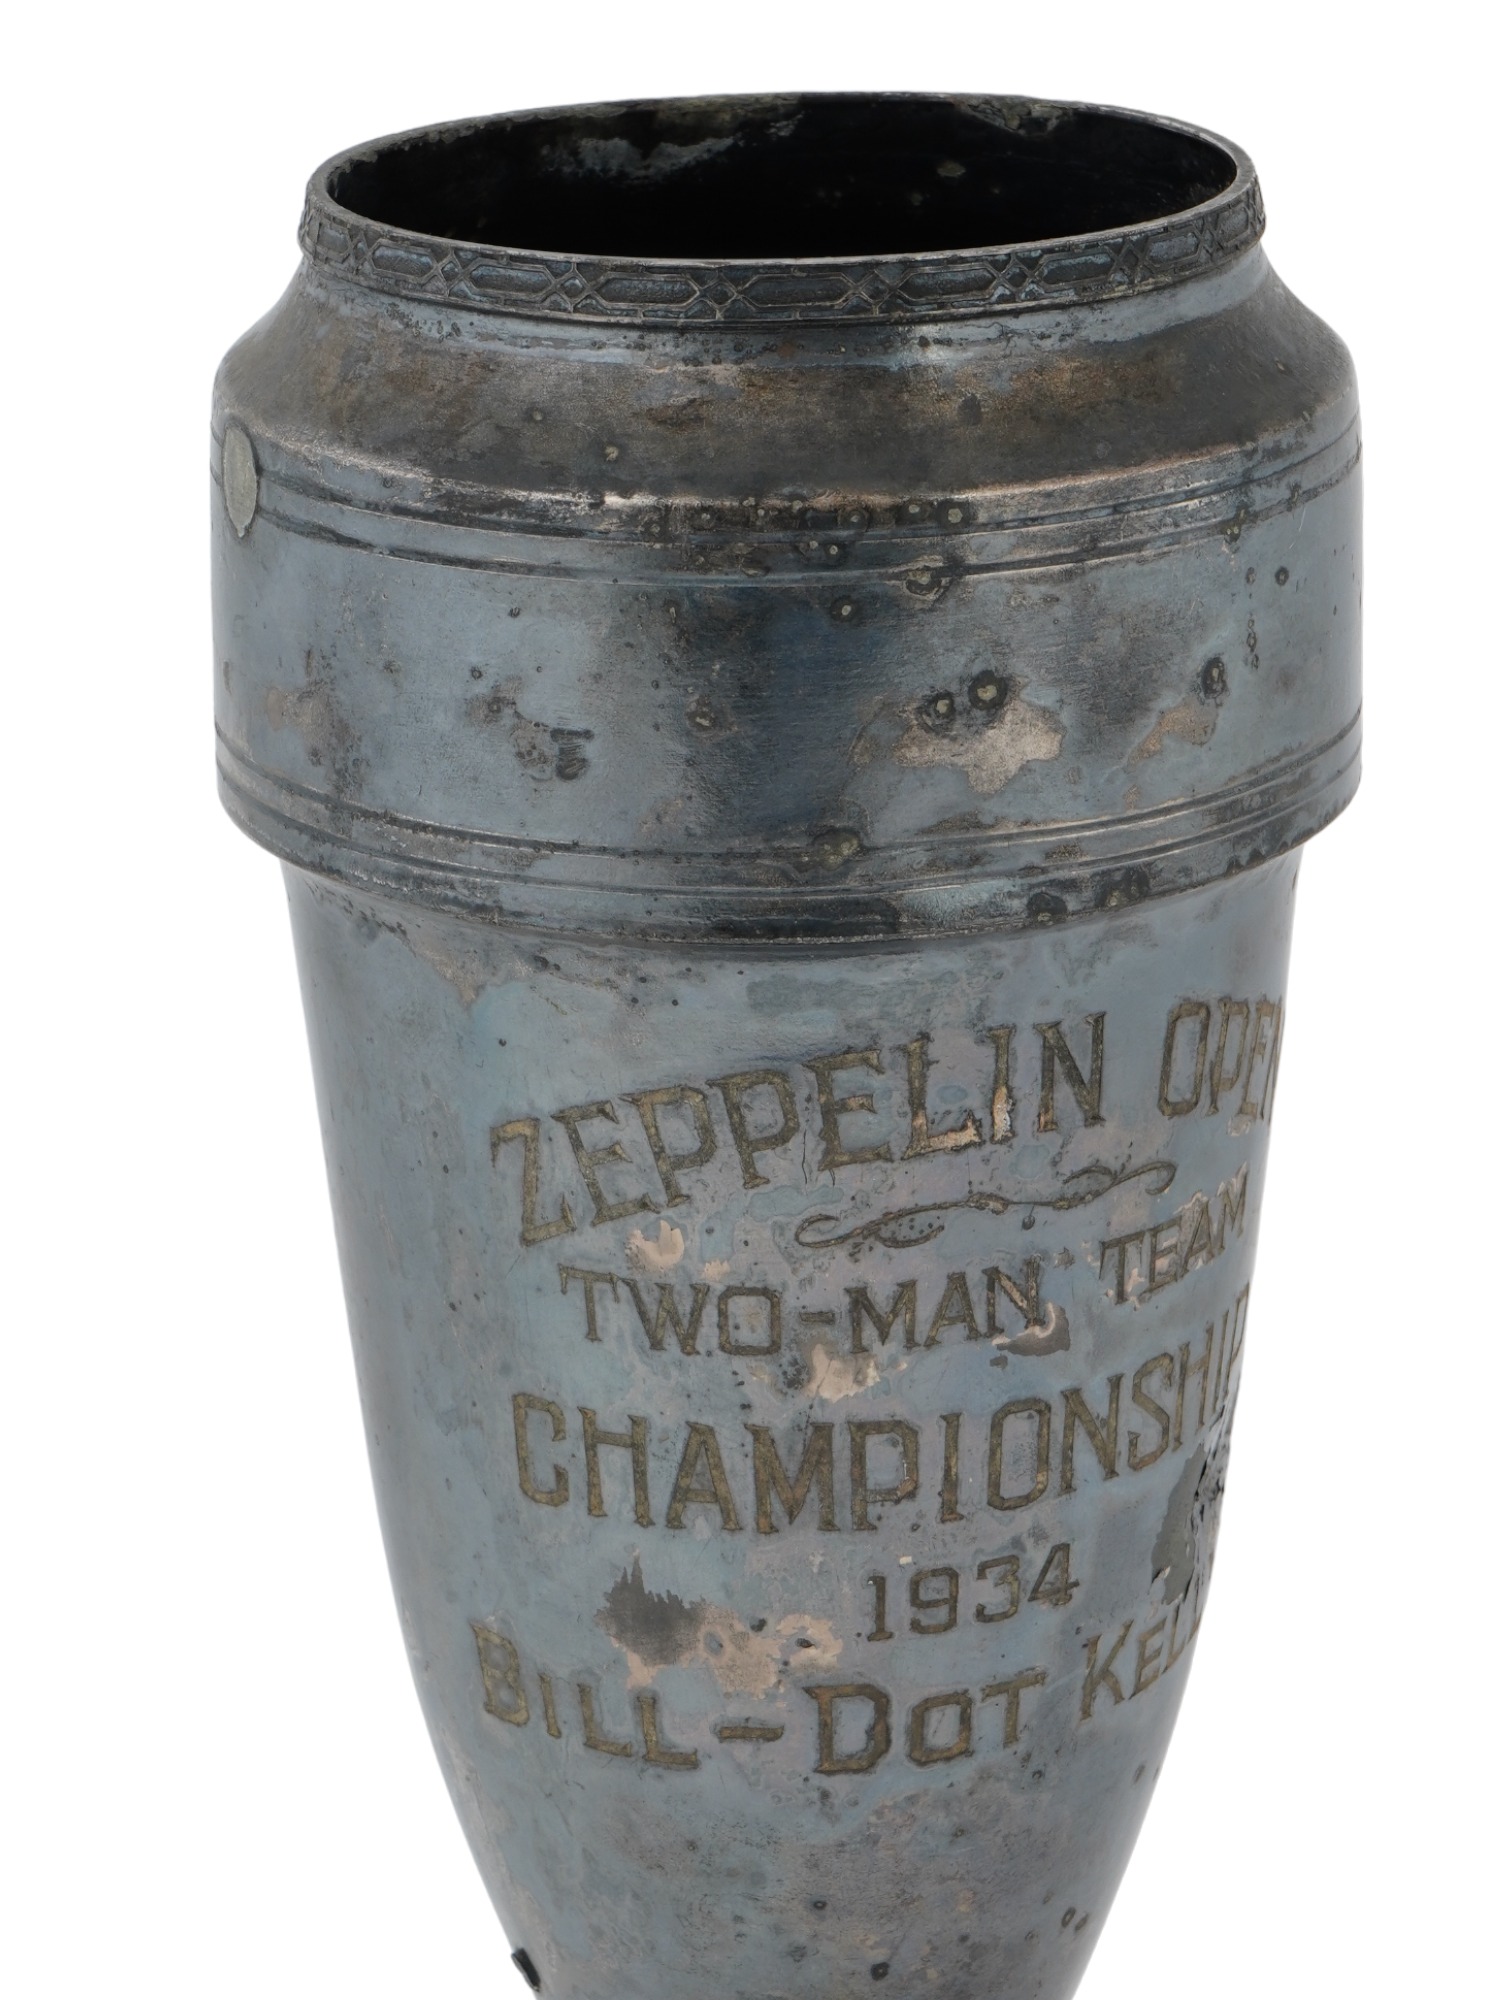 1934 ZEPPELIN CHAMPIONSHIP TROPHY CUP PIC-5